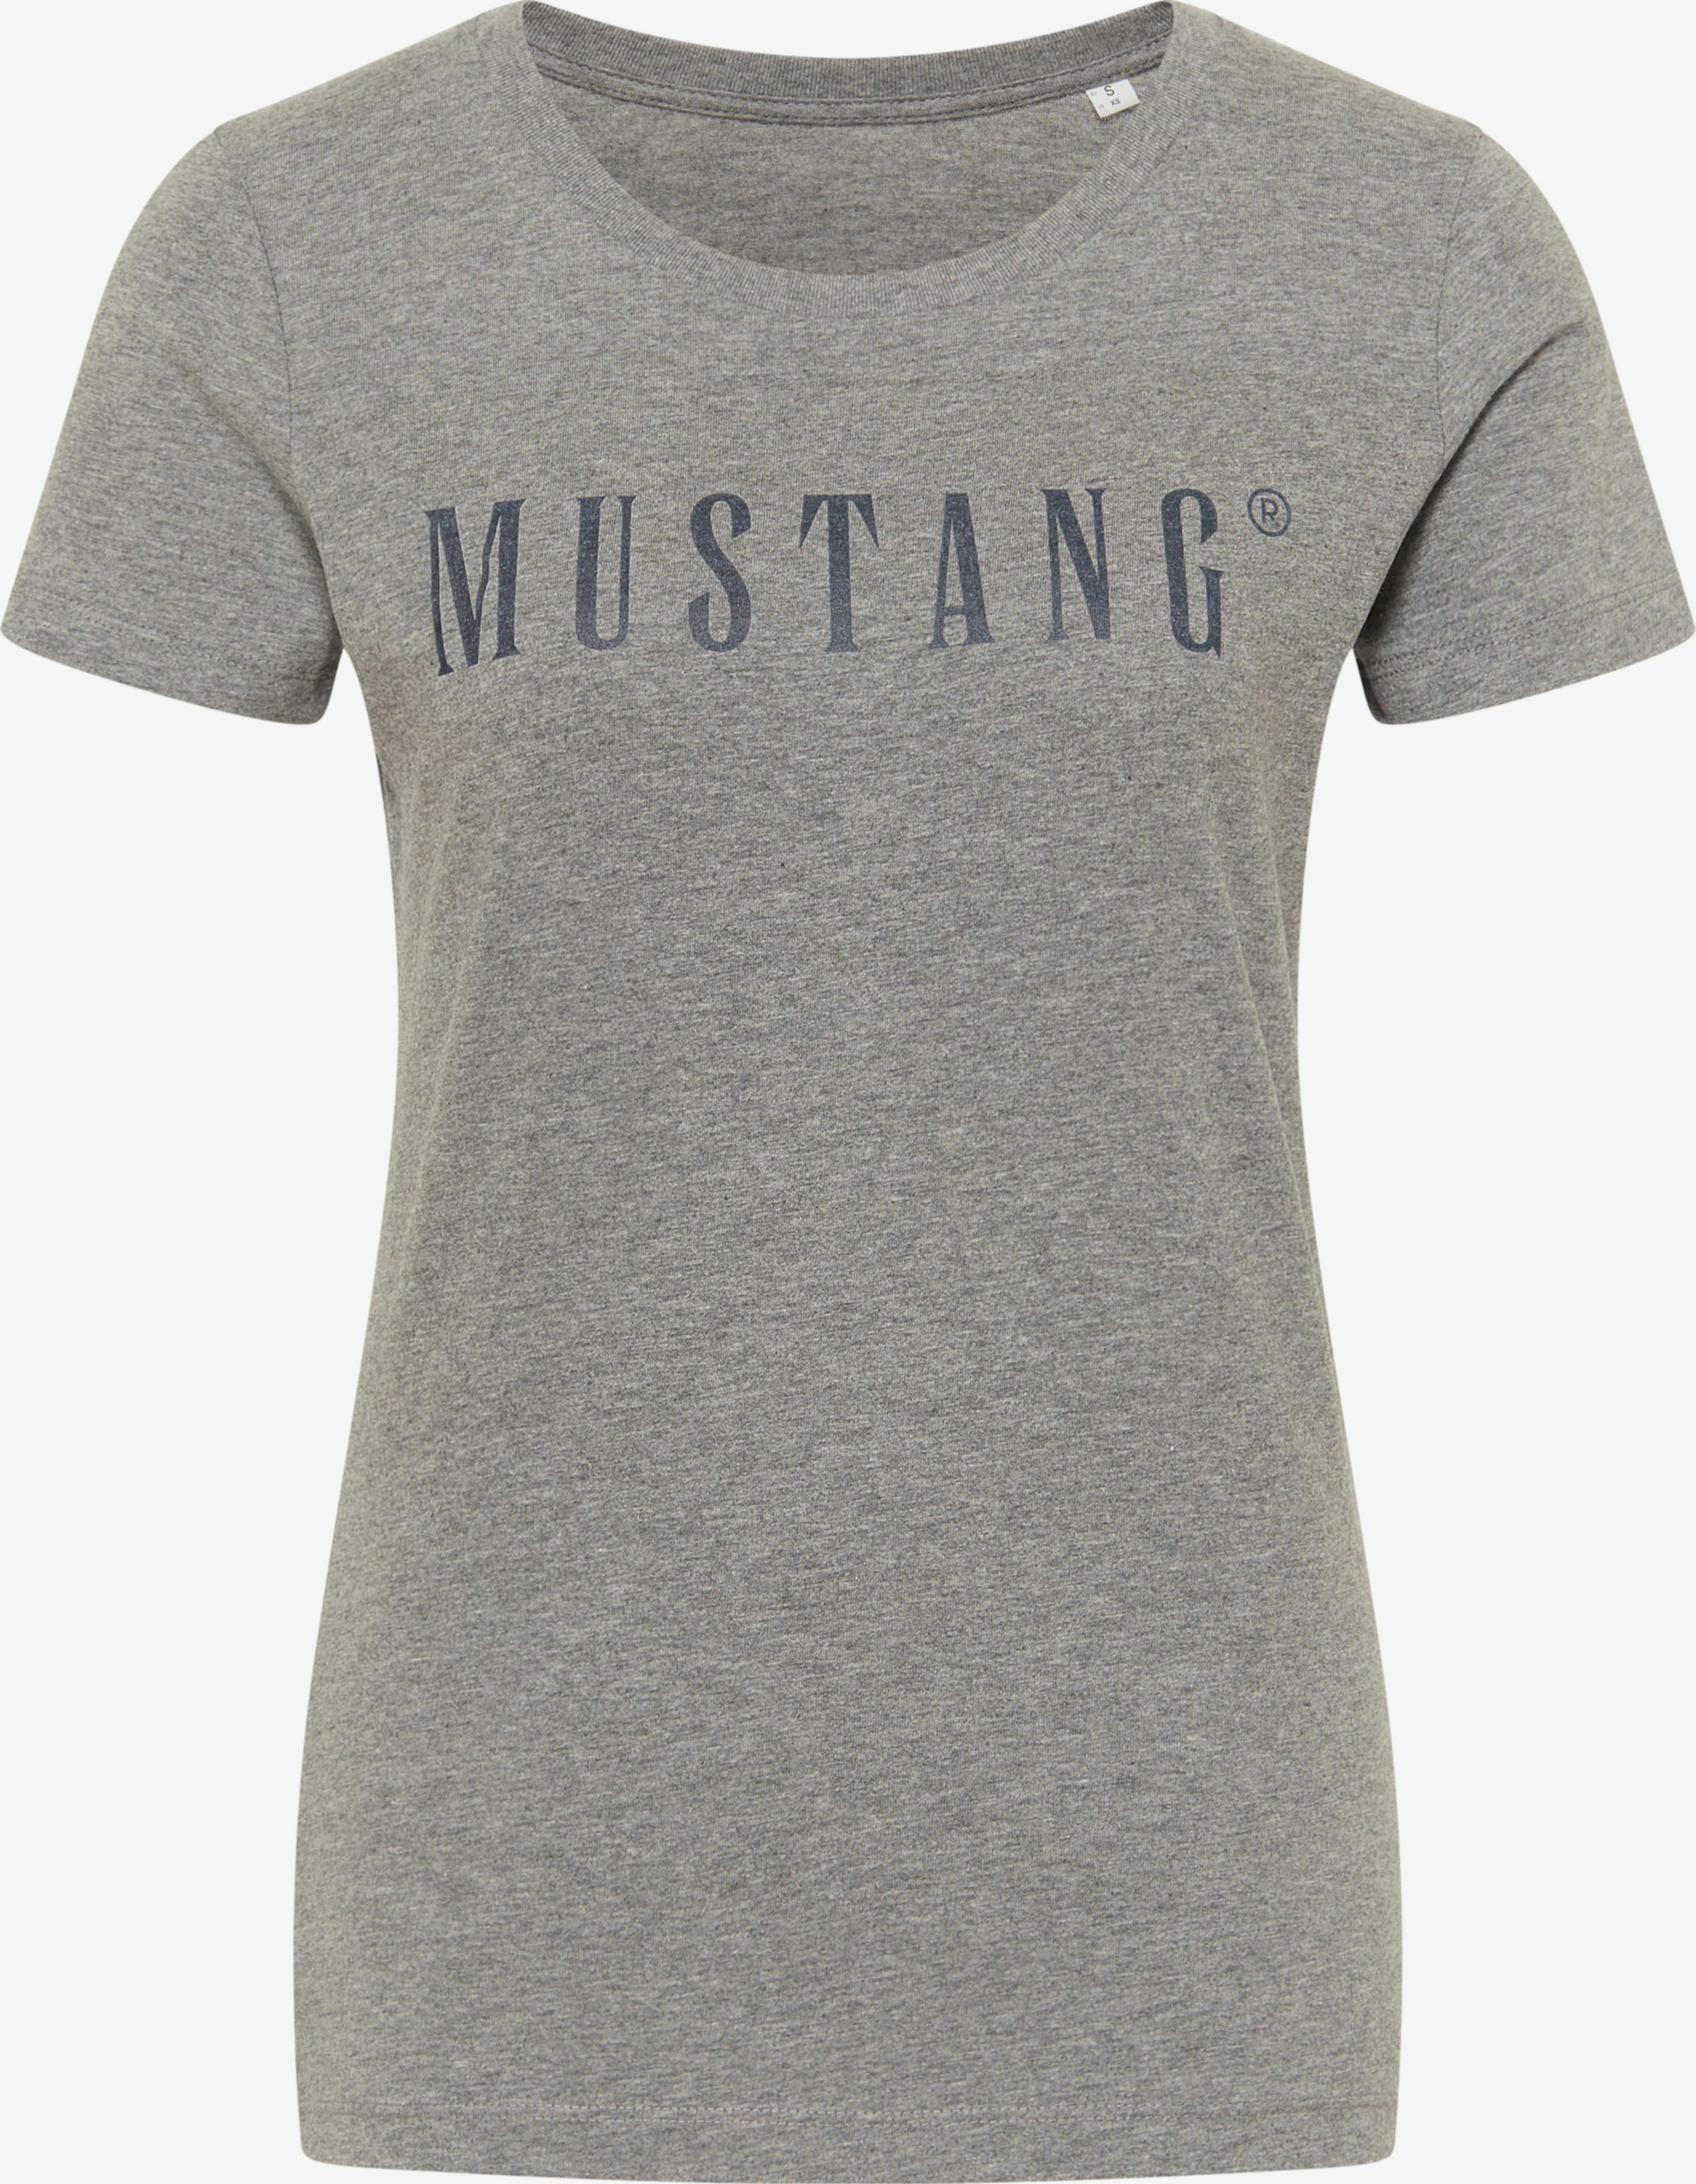 MUSTANG T-Shirt in Dunkelgrau, ABOUT YOU | Graumeliert